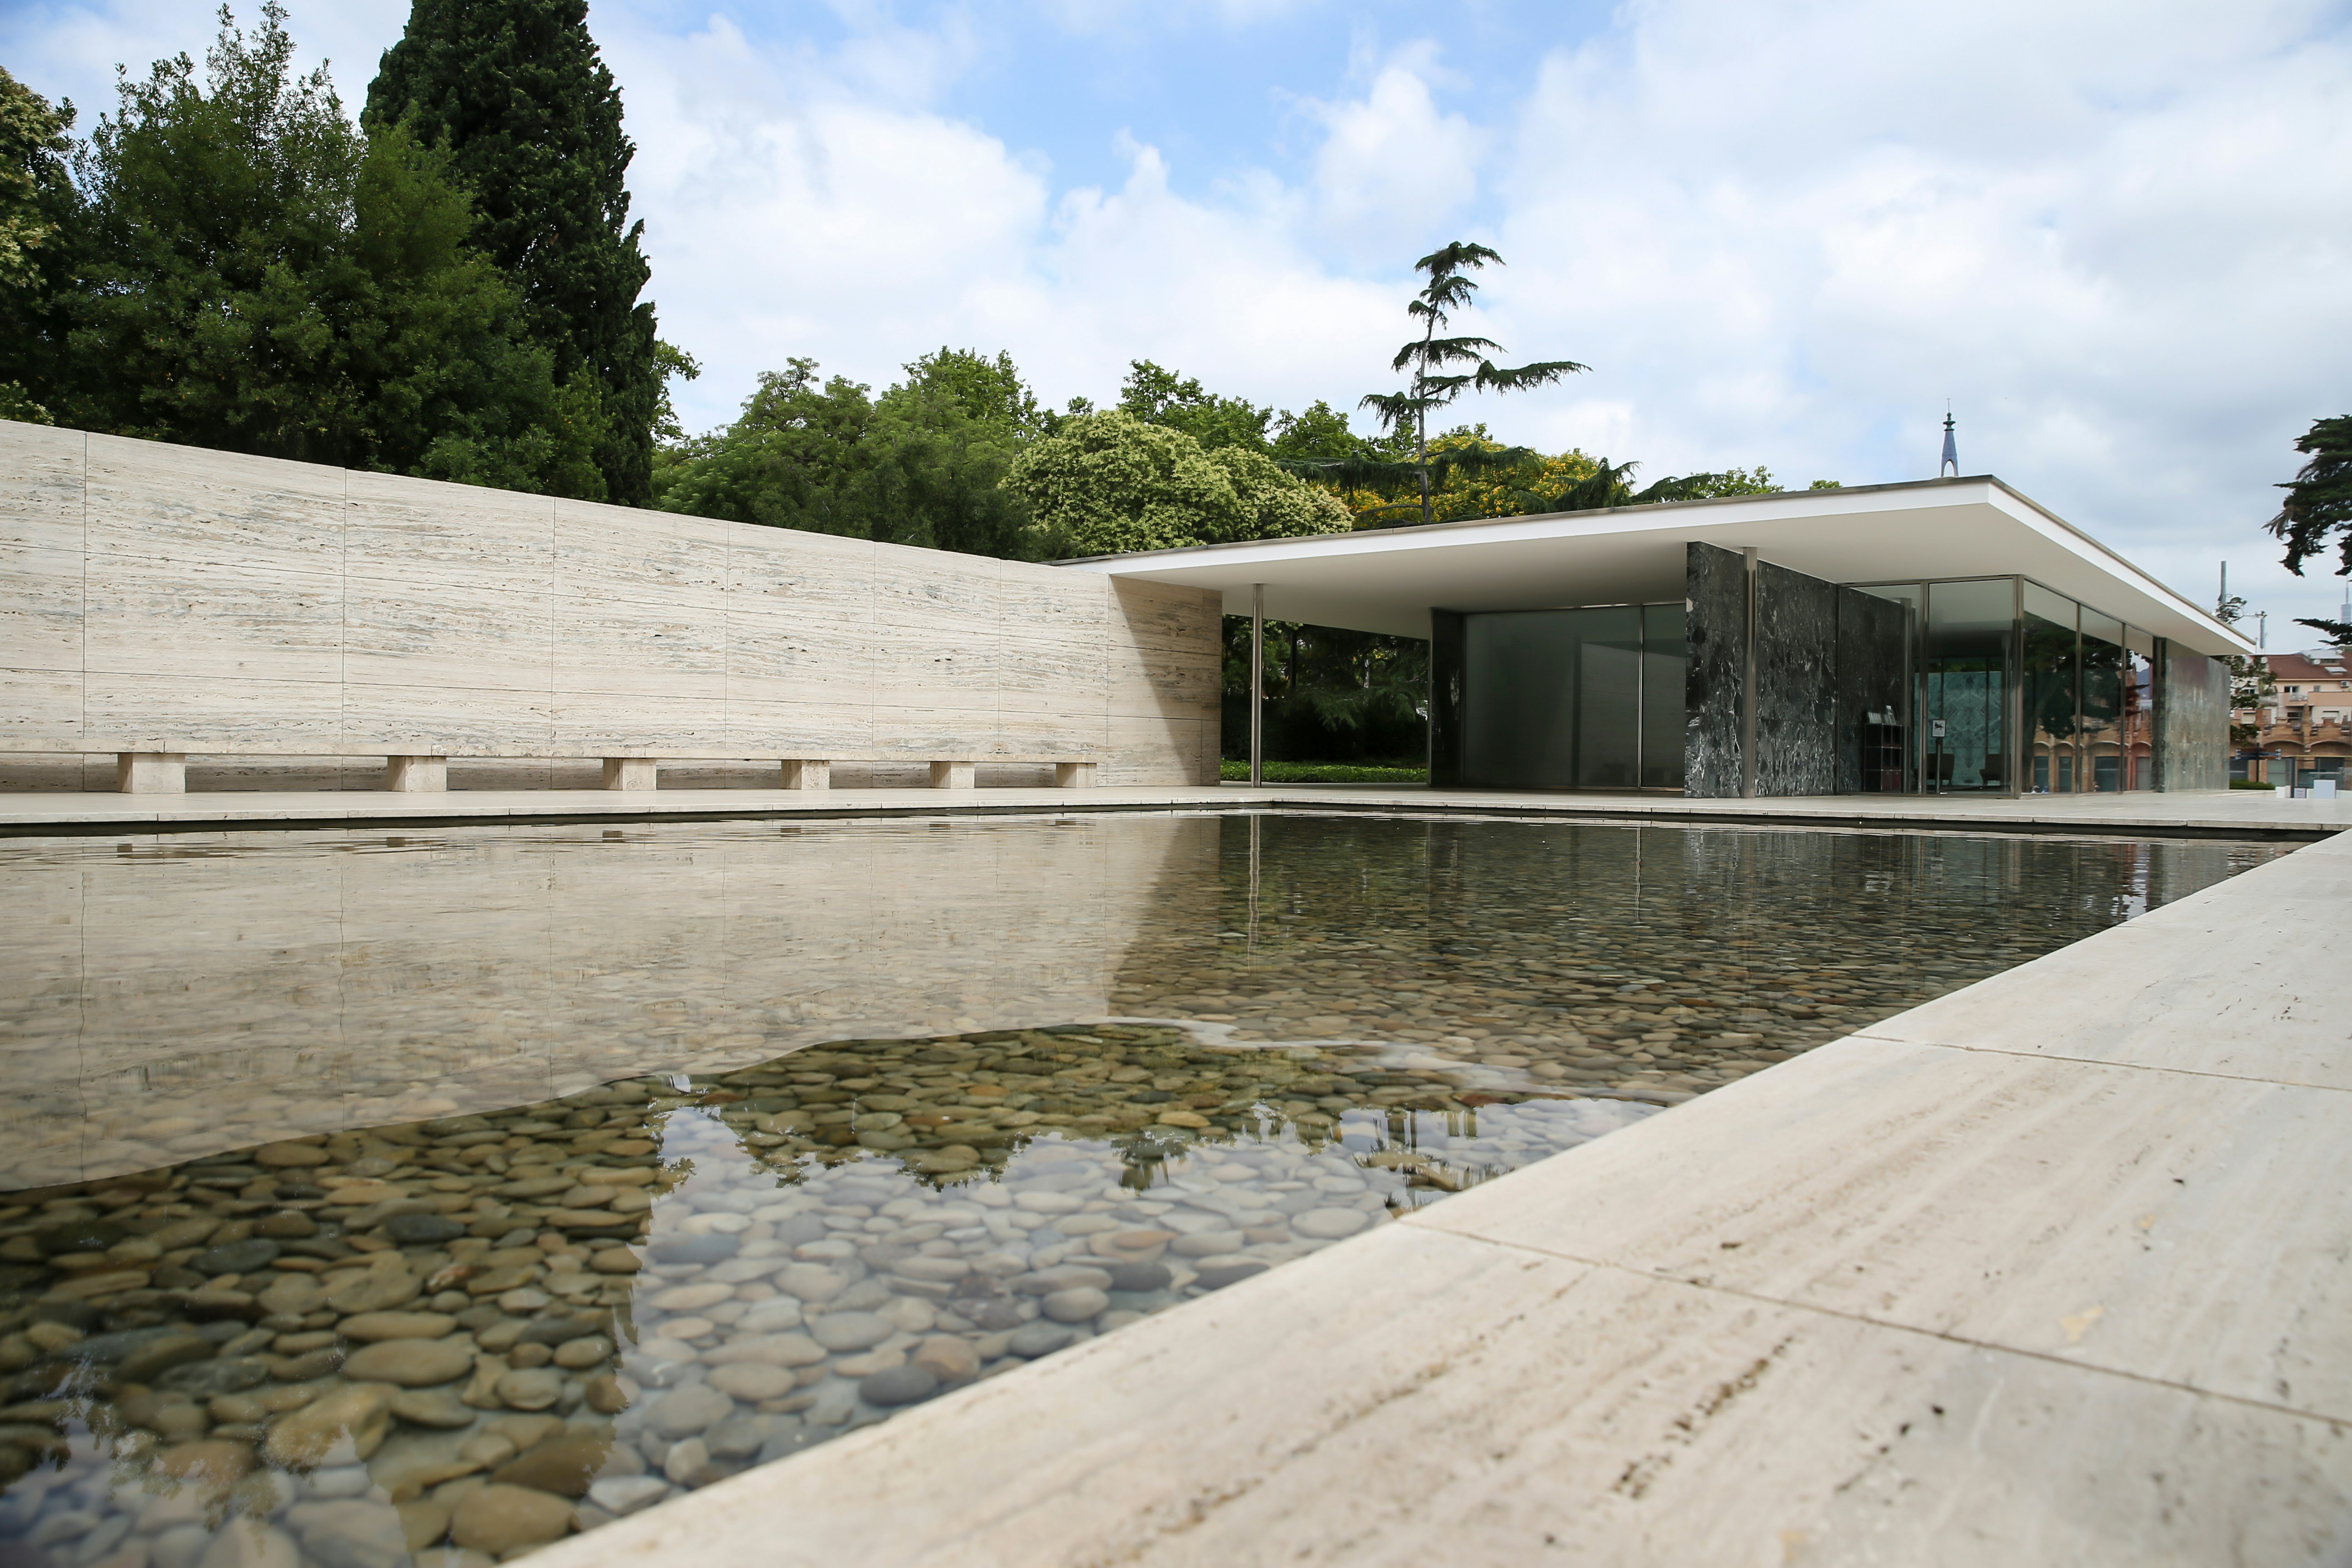 The exterior of the Barcelona Pavilion, which was designed by Mies Van Der Rohe for the 1929 World Exposition. A shallow pool filled with stones is visible in front.